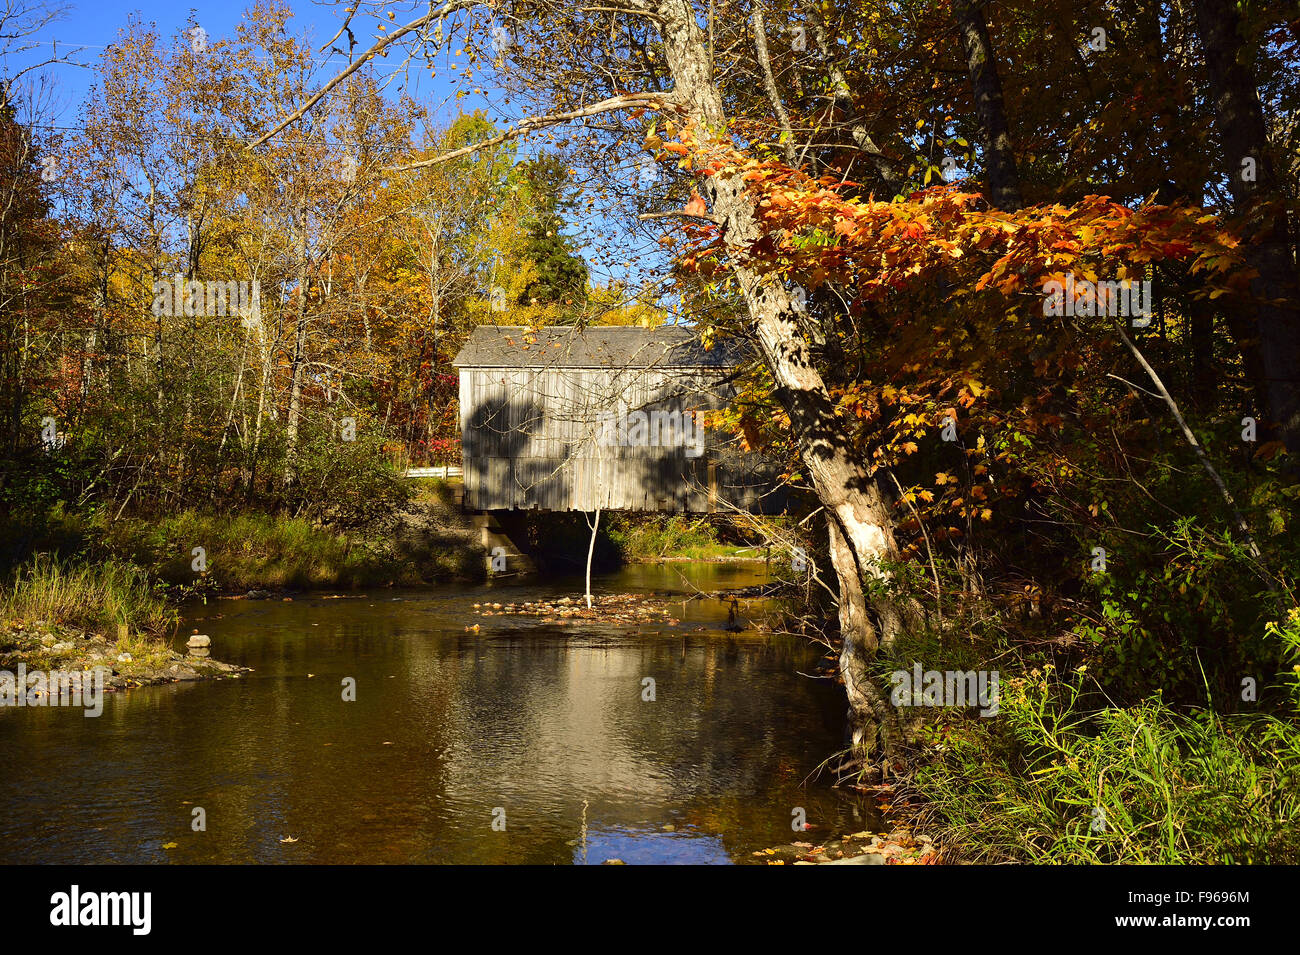 A side view of the iconic wooden covered bridge spanning the Trout Creek at Moors Mills near Waterford New Brunswick Canada Stock Photo